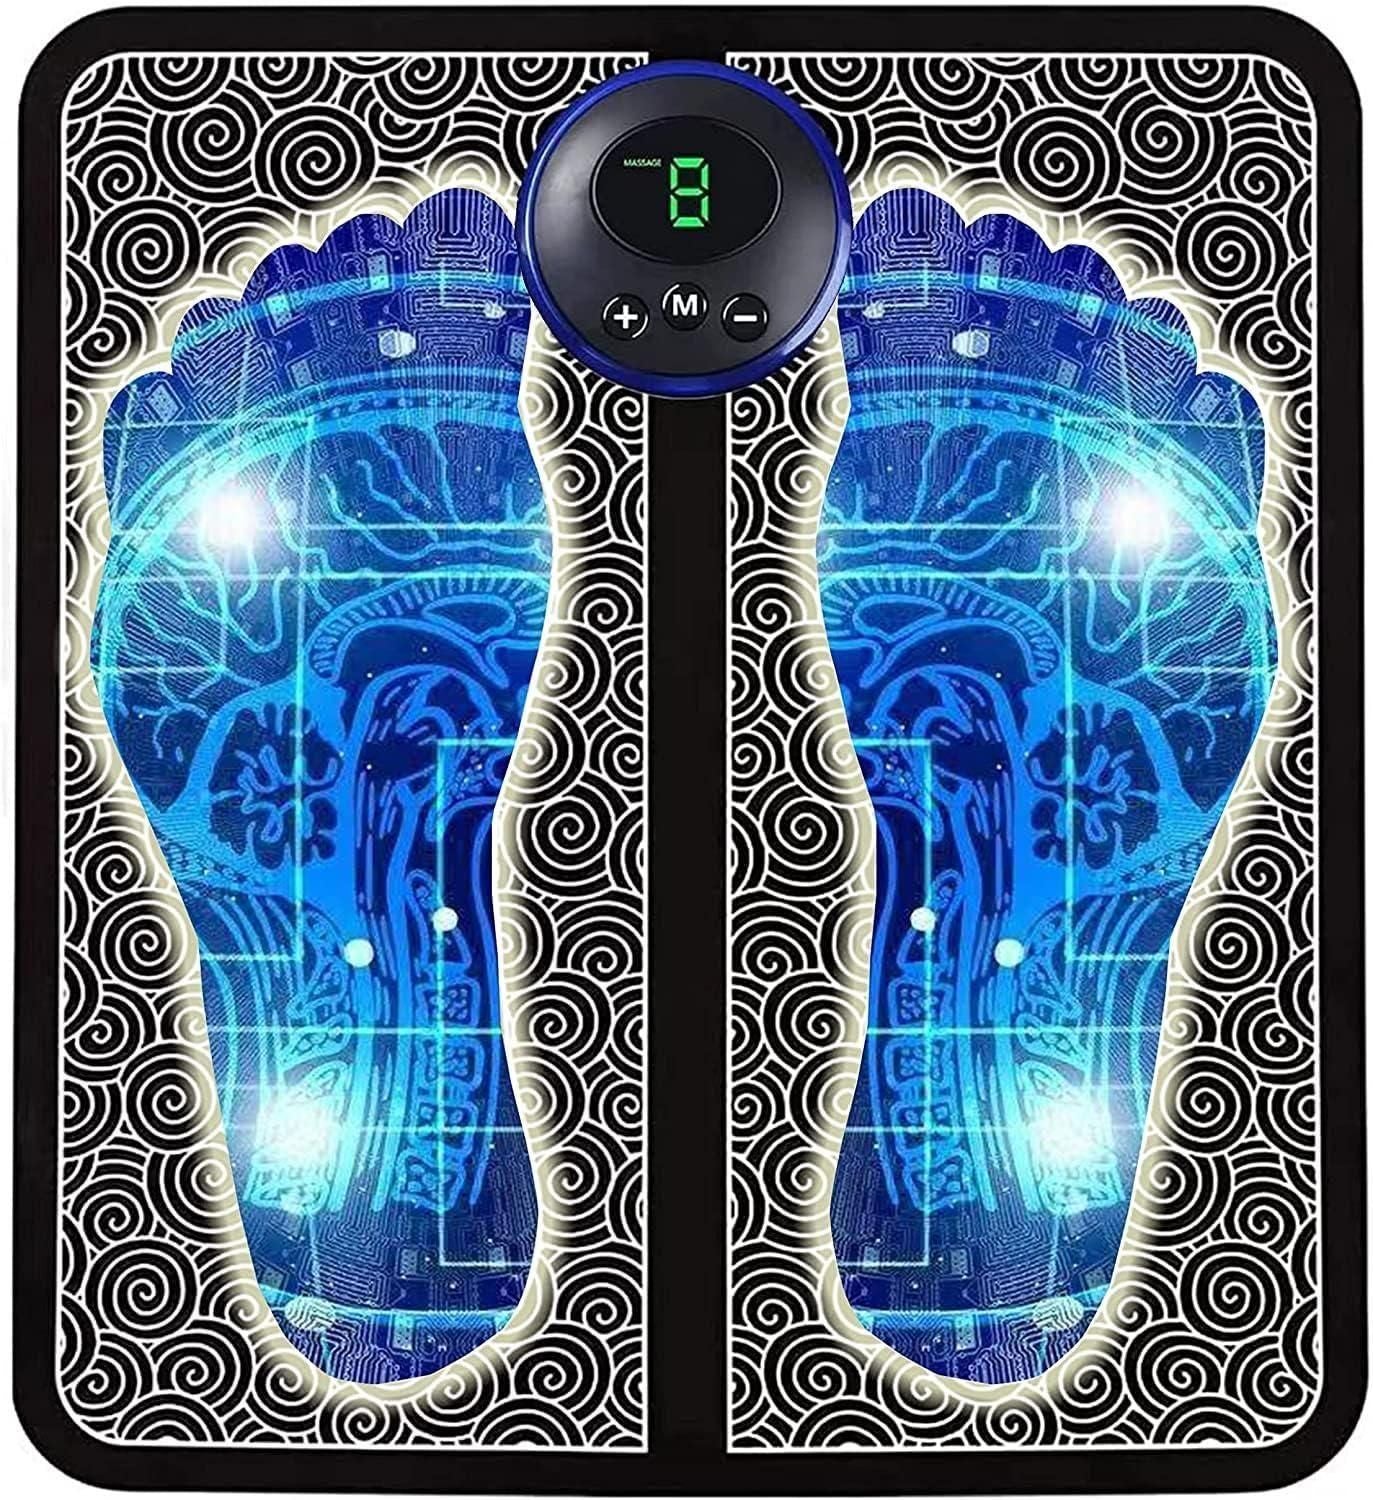 Vibrating Bubble Electric Ems Foot Massager Pad